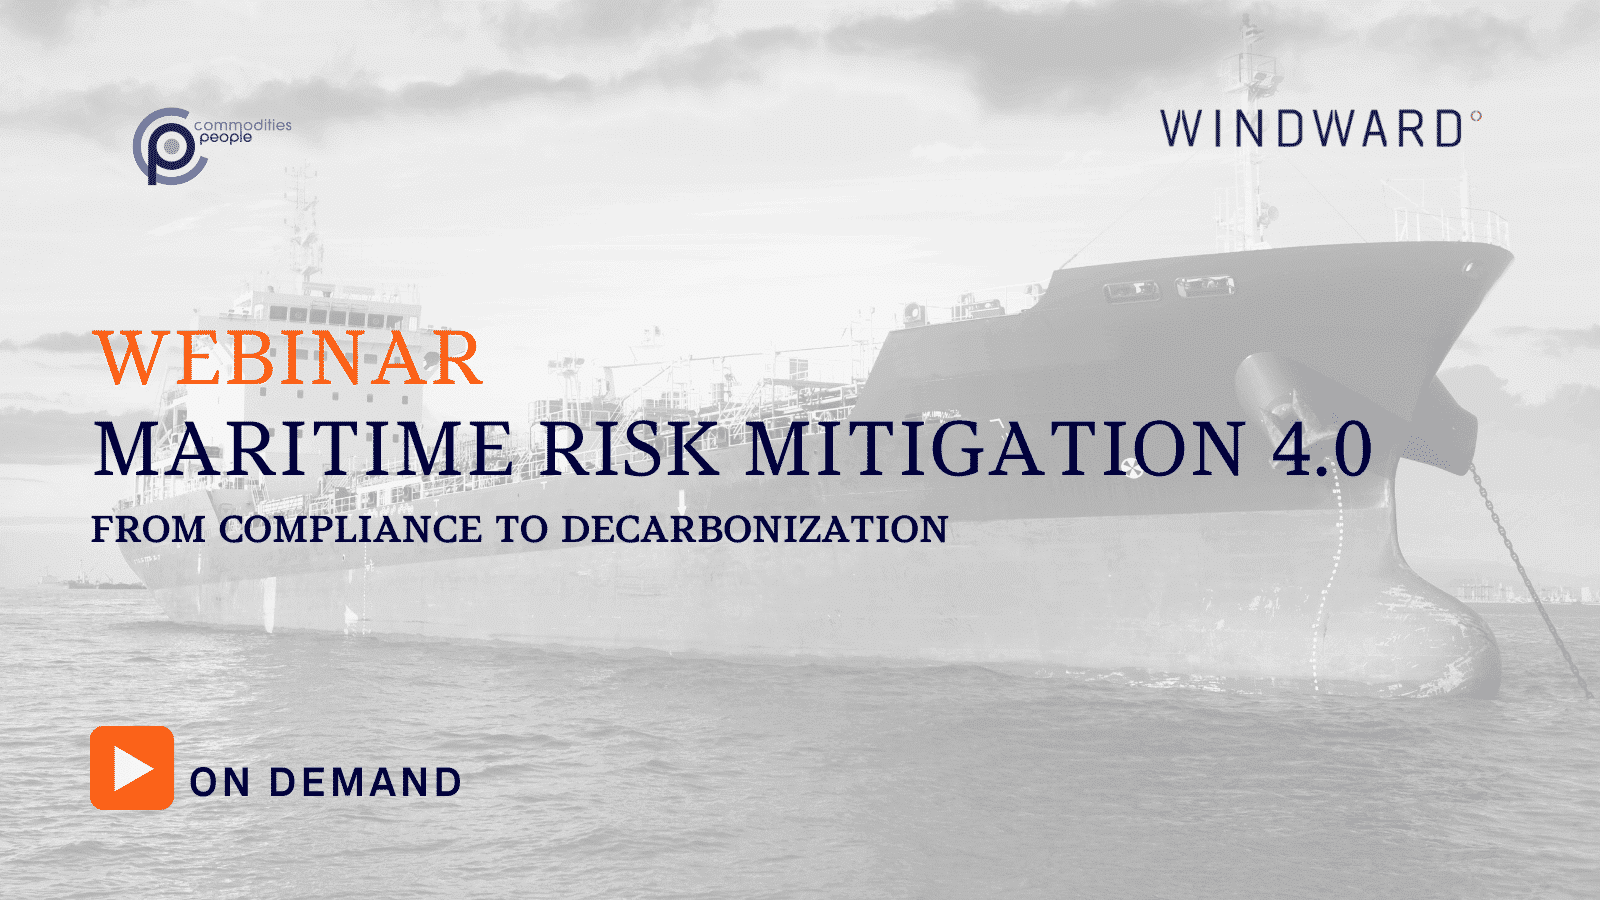 [On demand webinar] Maritime risk mitigation 4.0 - From compliance to decarbonization